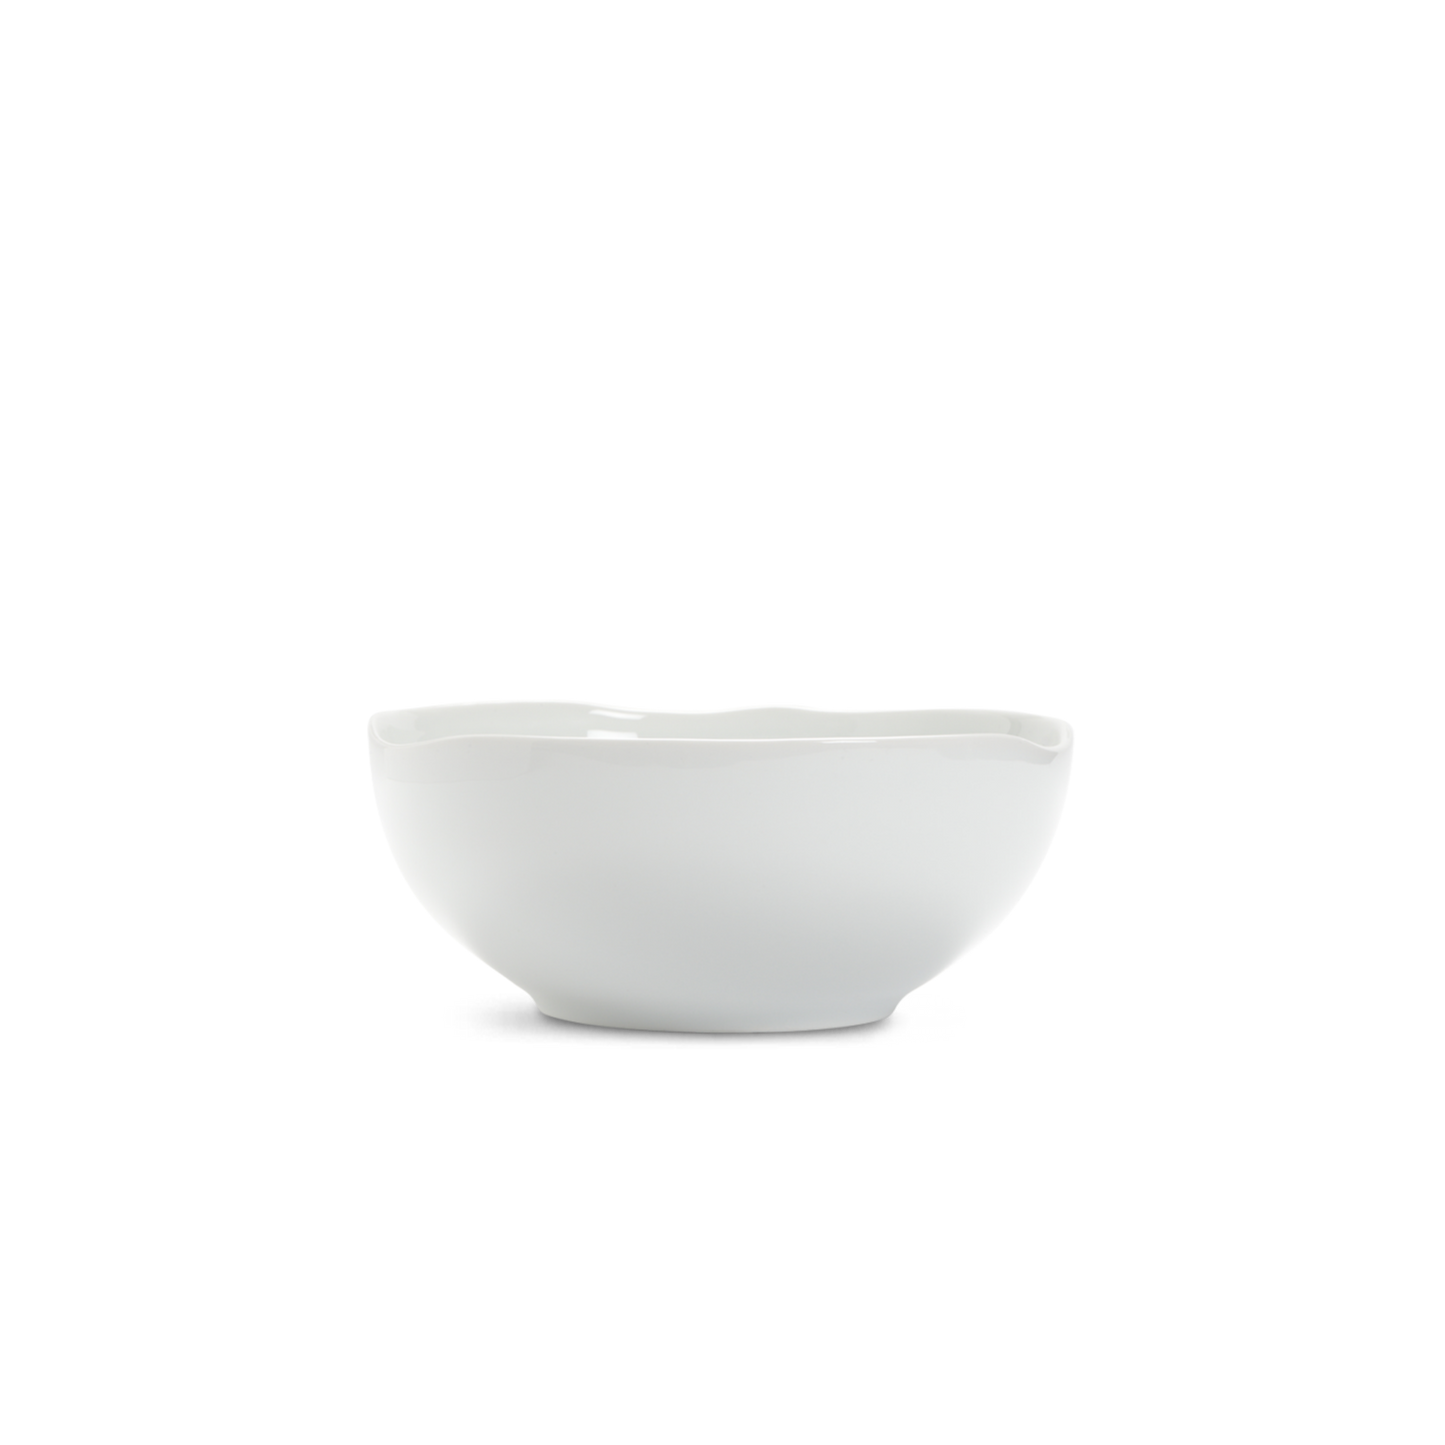 Teck 6" White Cereal Bowls, Set of 4